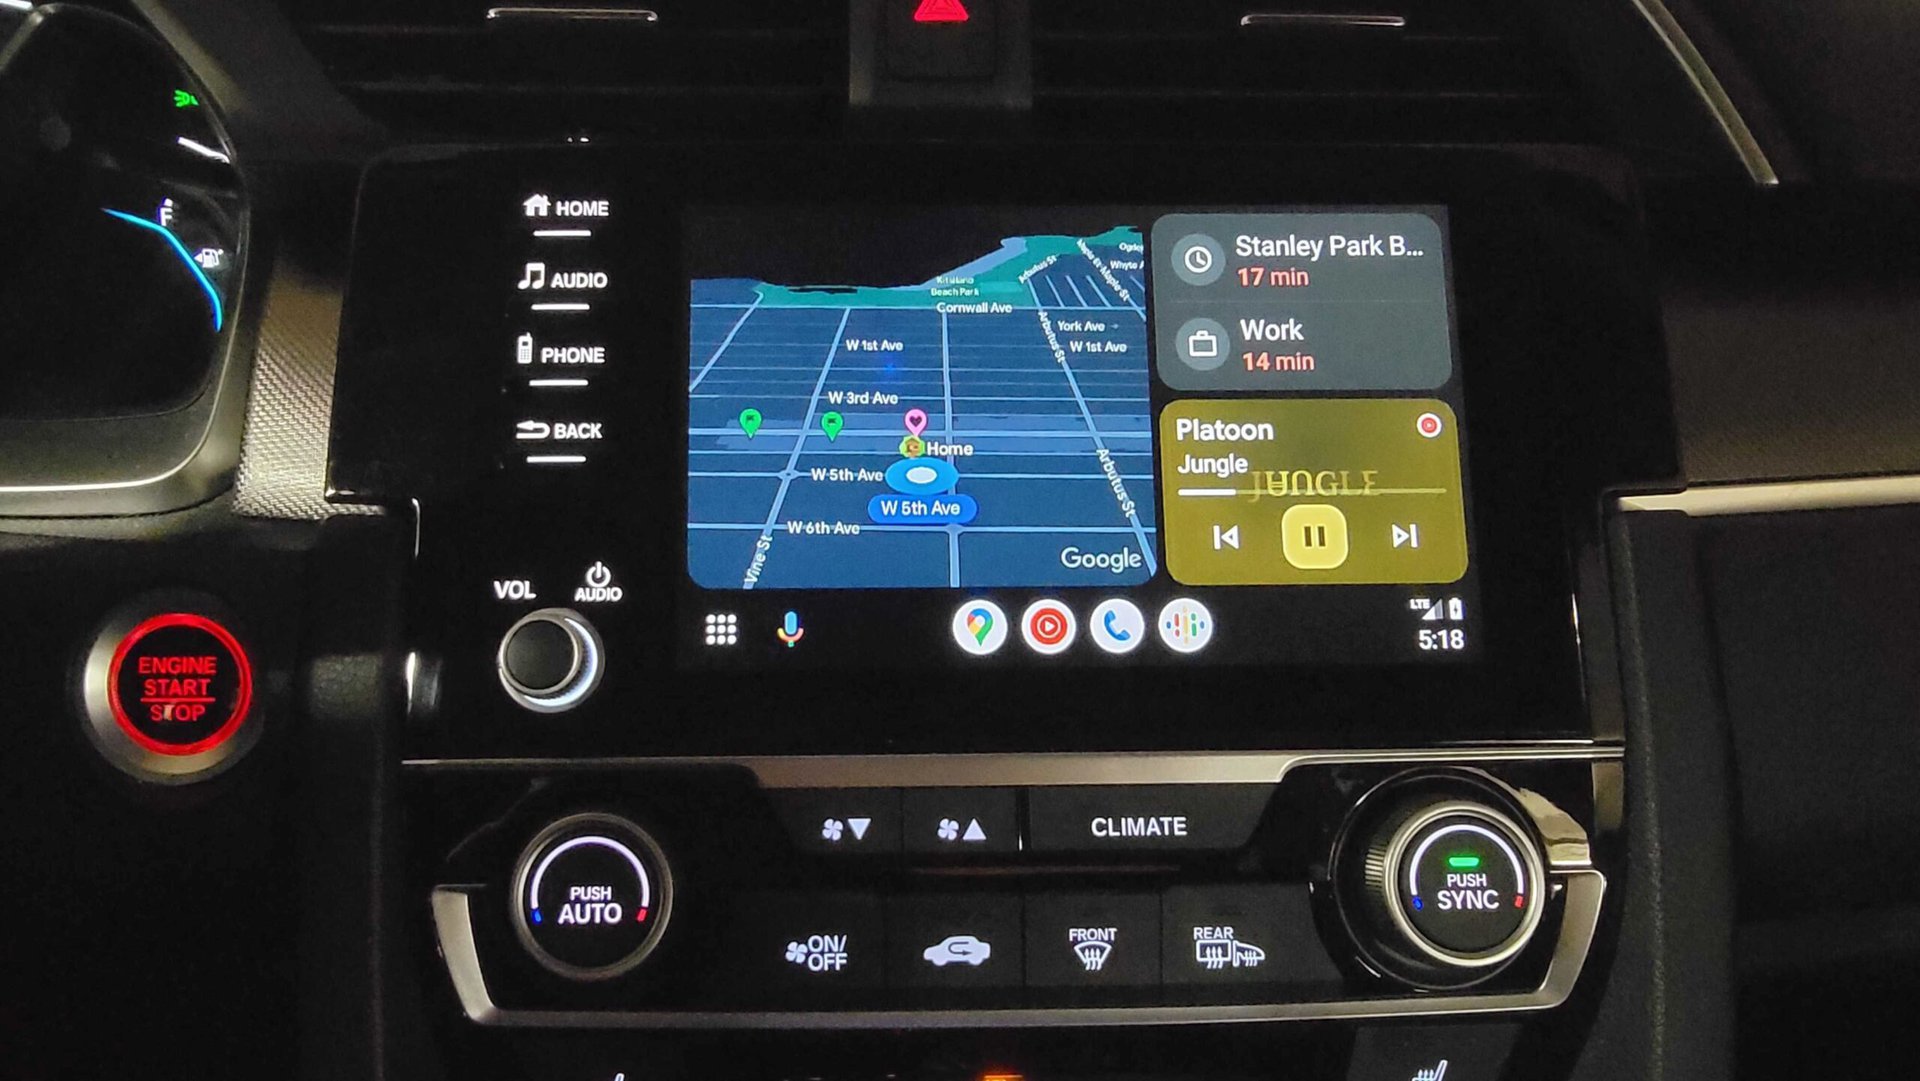 Step-by-Step Guide: Using the Navigation System in Your Volkswagen